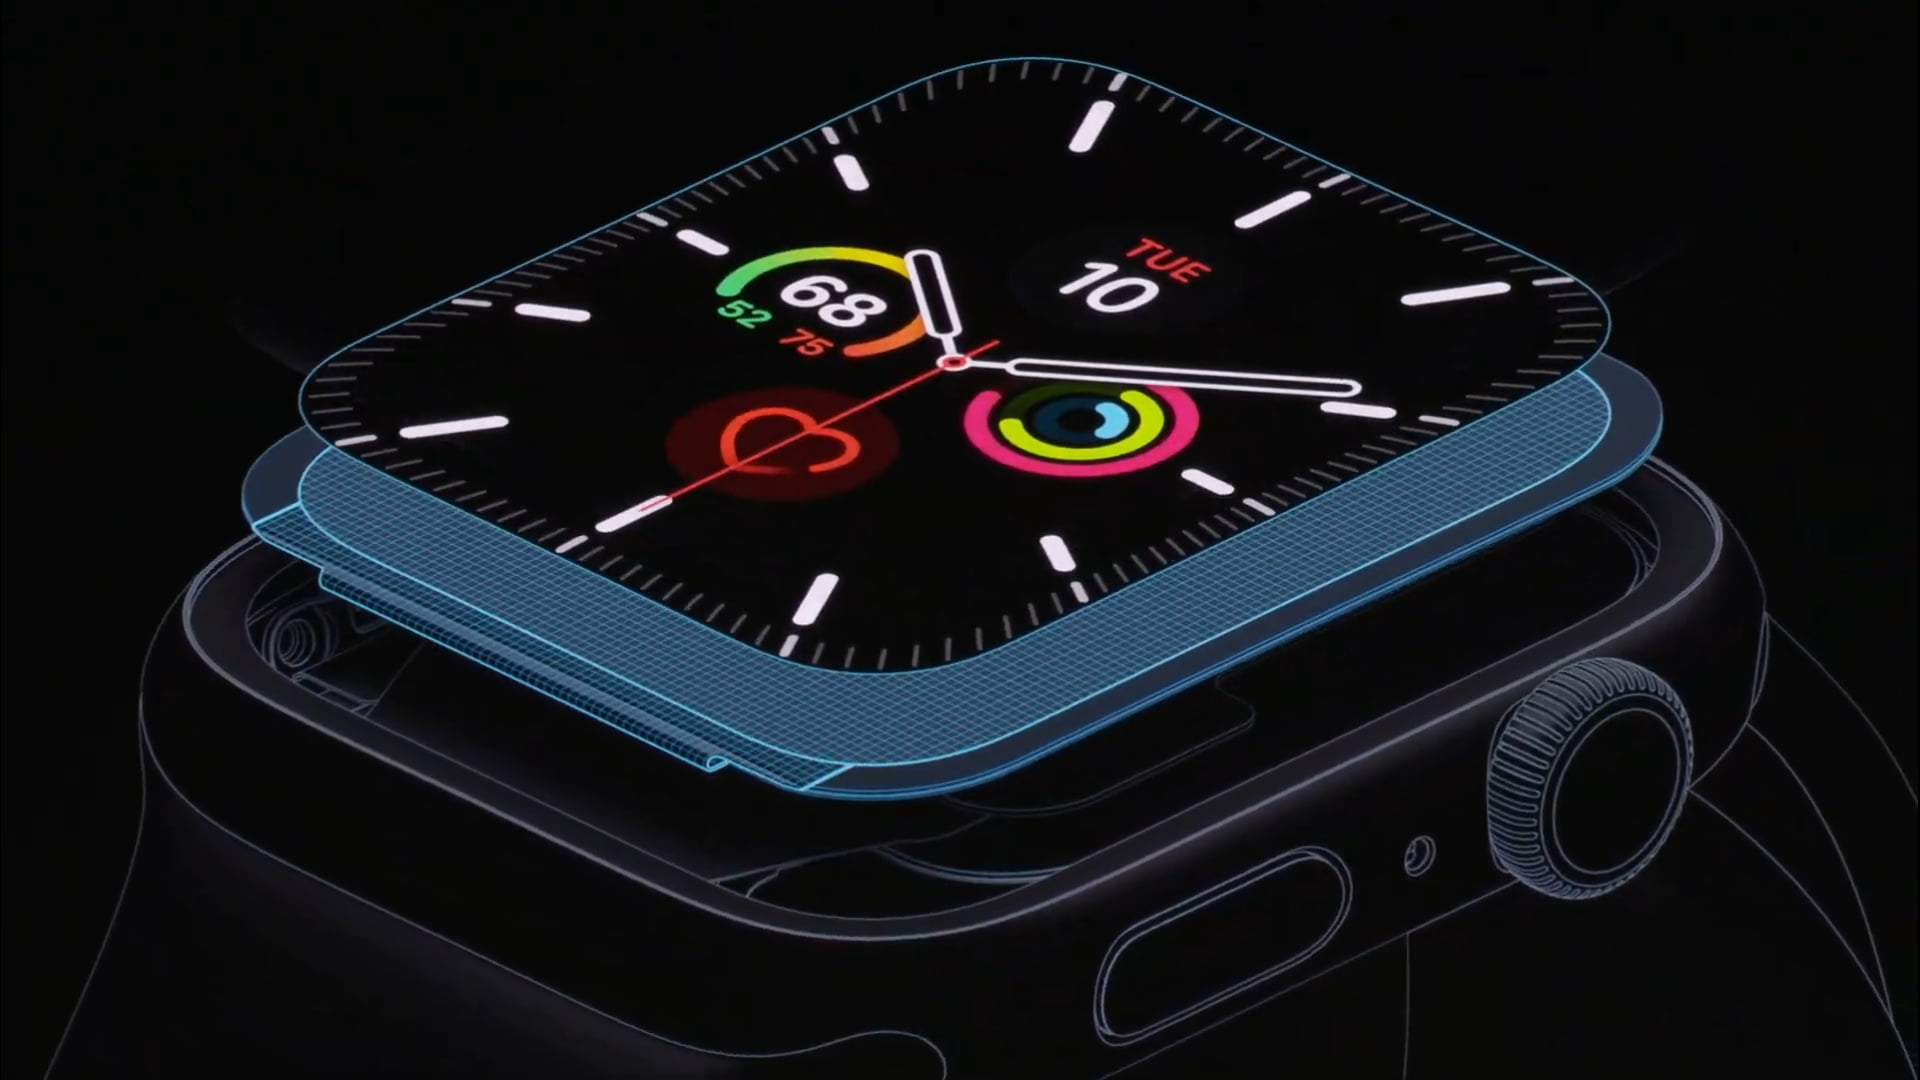 Apple Watch Series 5 Unveiled With Always-On Display & More